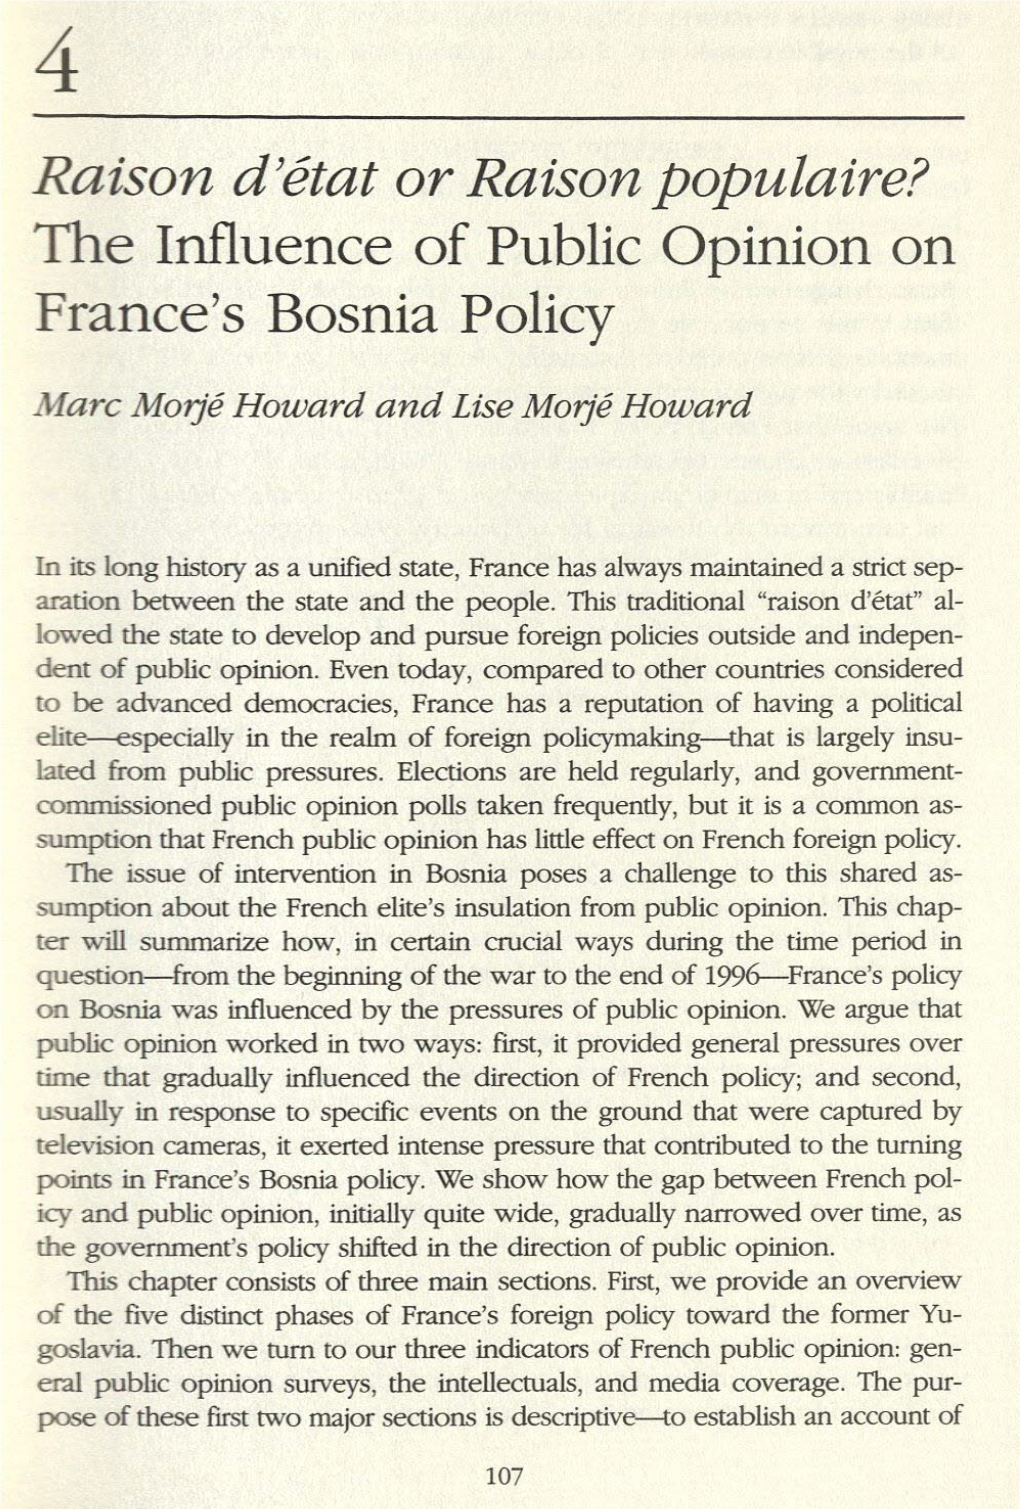 The Influence of Public Opinion on France's Bosnia Policy